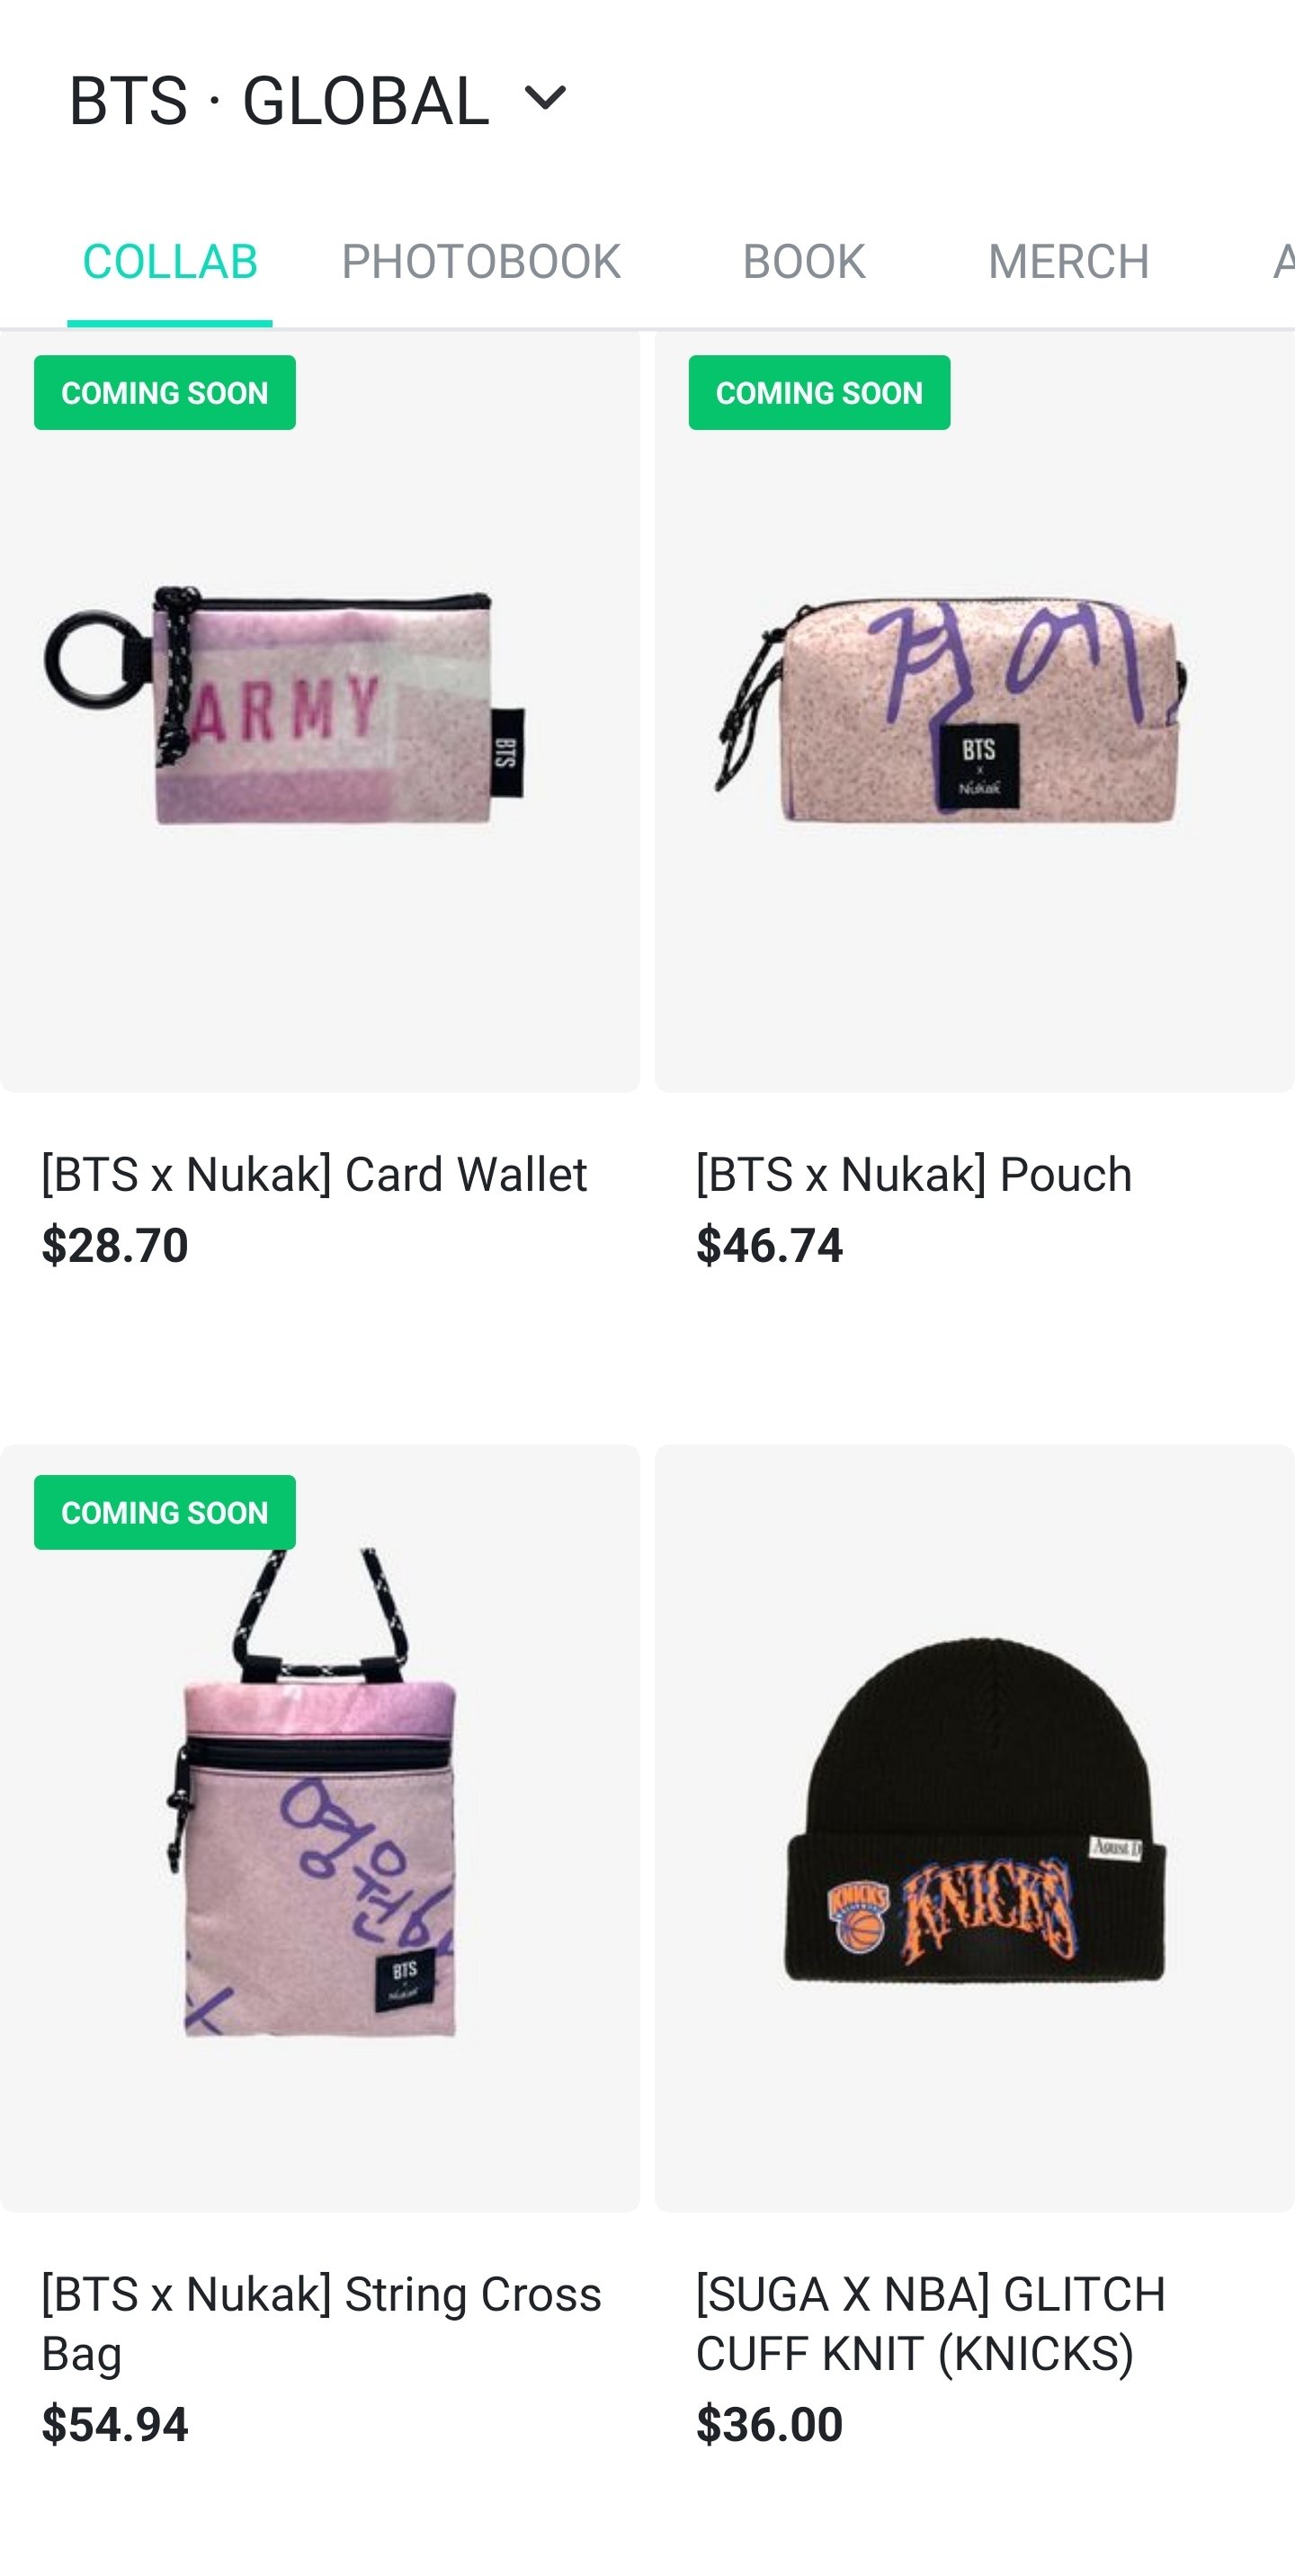 Missing BTS? Walk down memory lane and snag exclusive merchandise